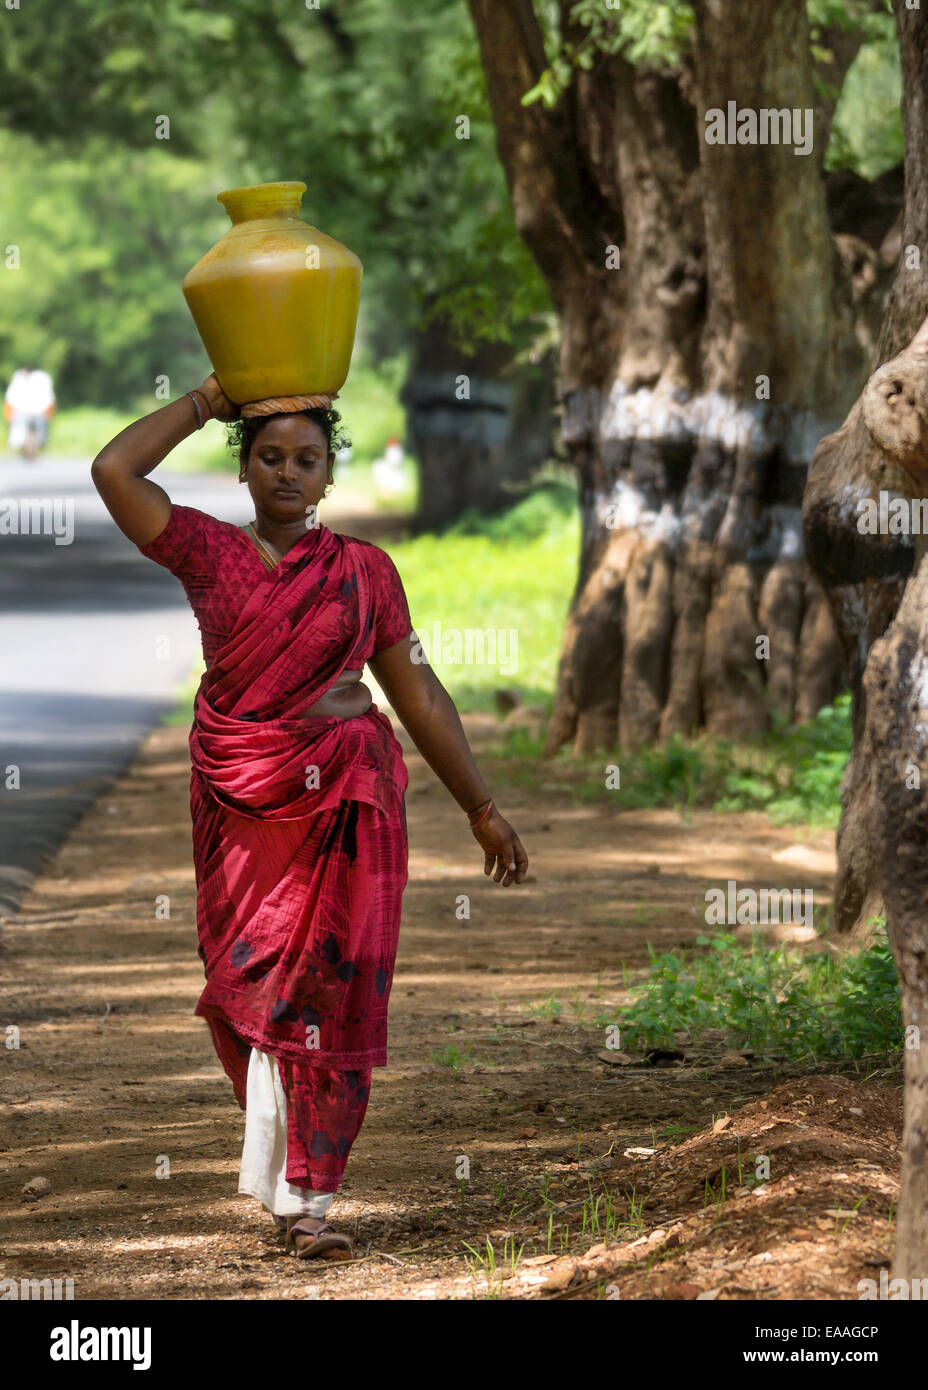 Indian woman carries pot of water on her head along a shaded country road. Stock Photo